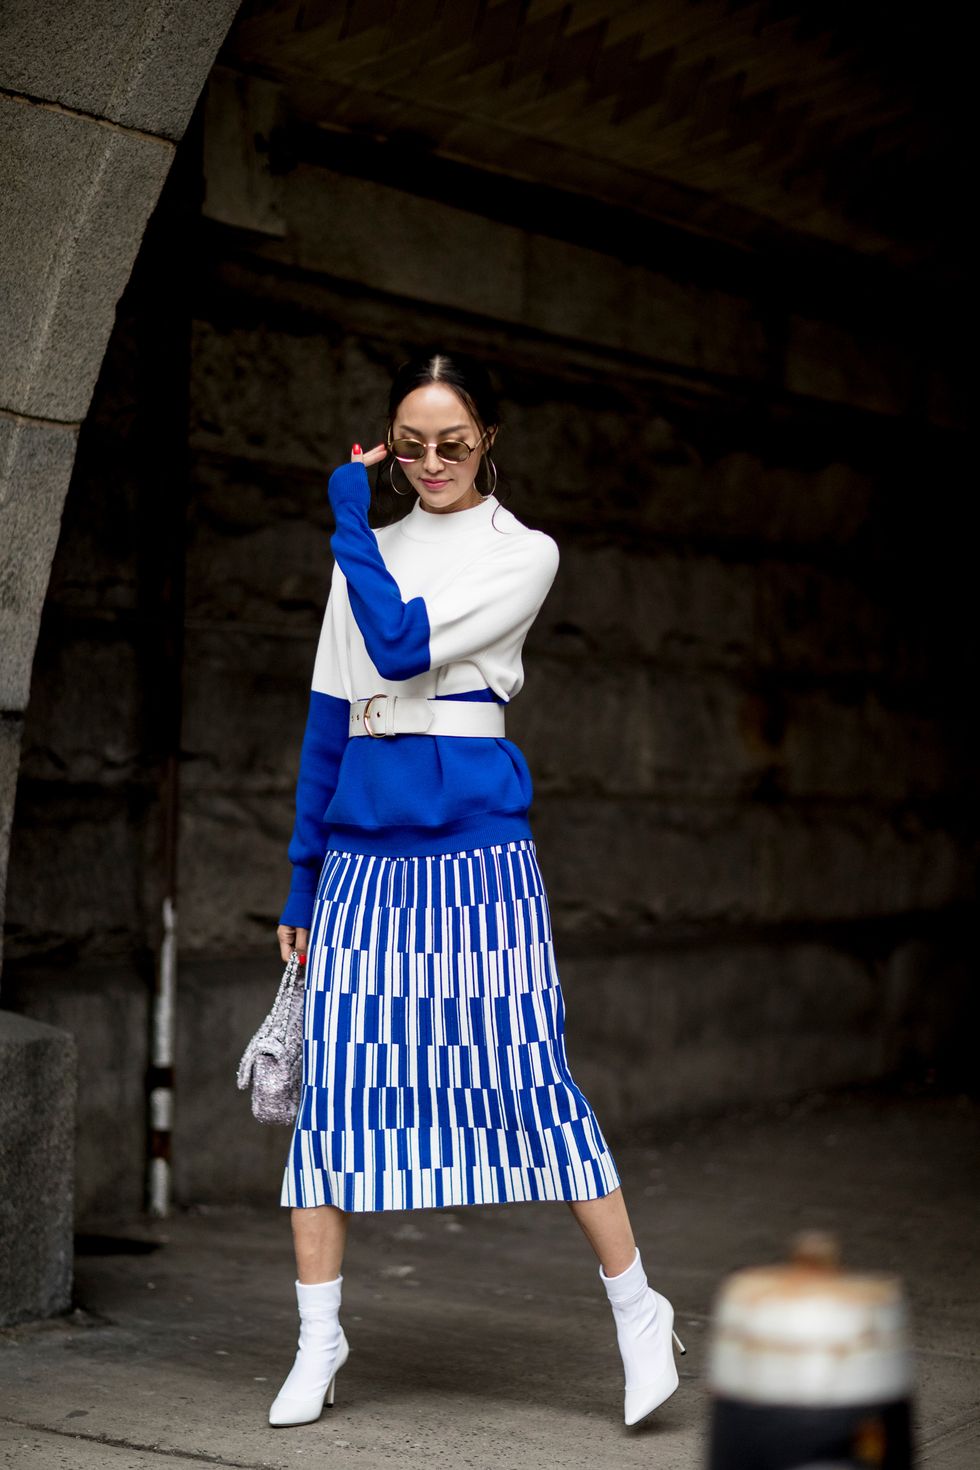 Blue, Cobalt blue, White, Clothing, Fashion, Electric blue, Footwear, Photography, Street fashion, Architecture, 